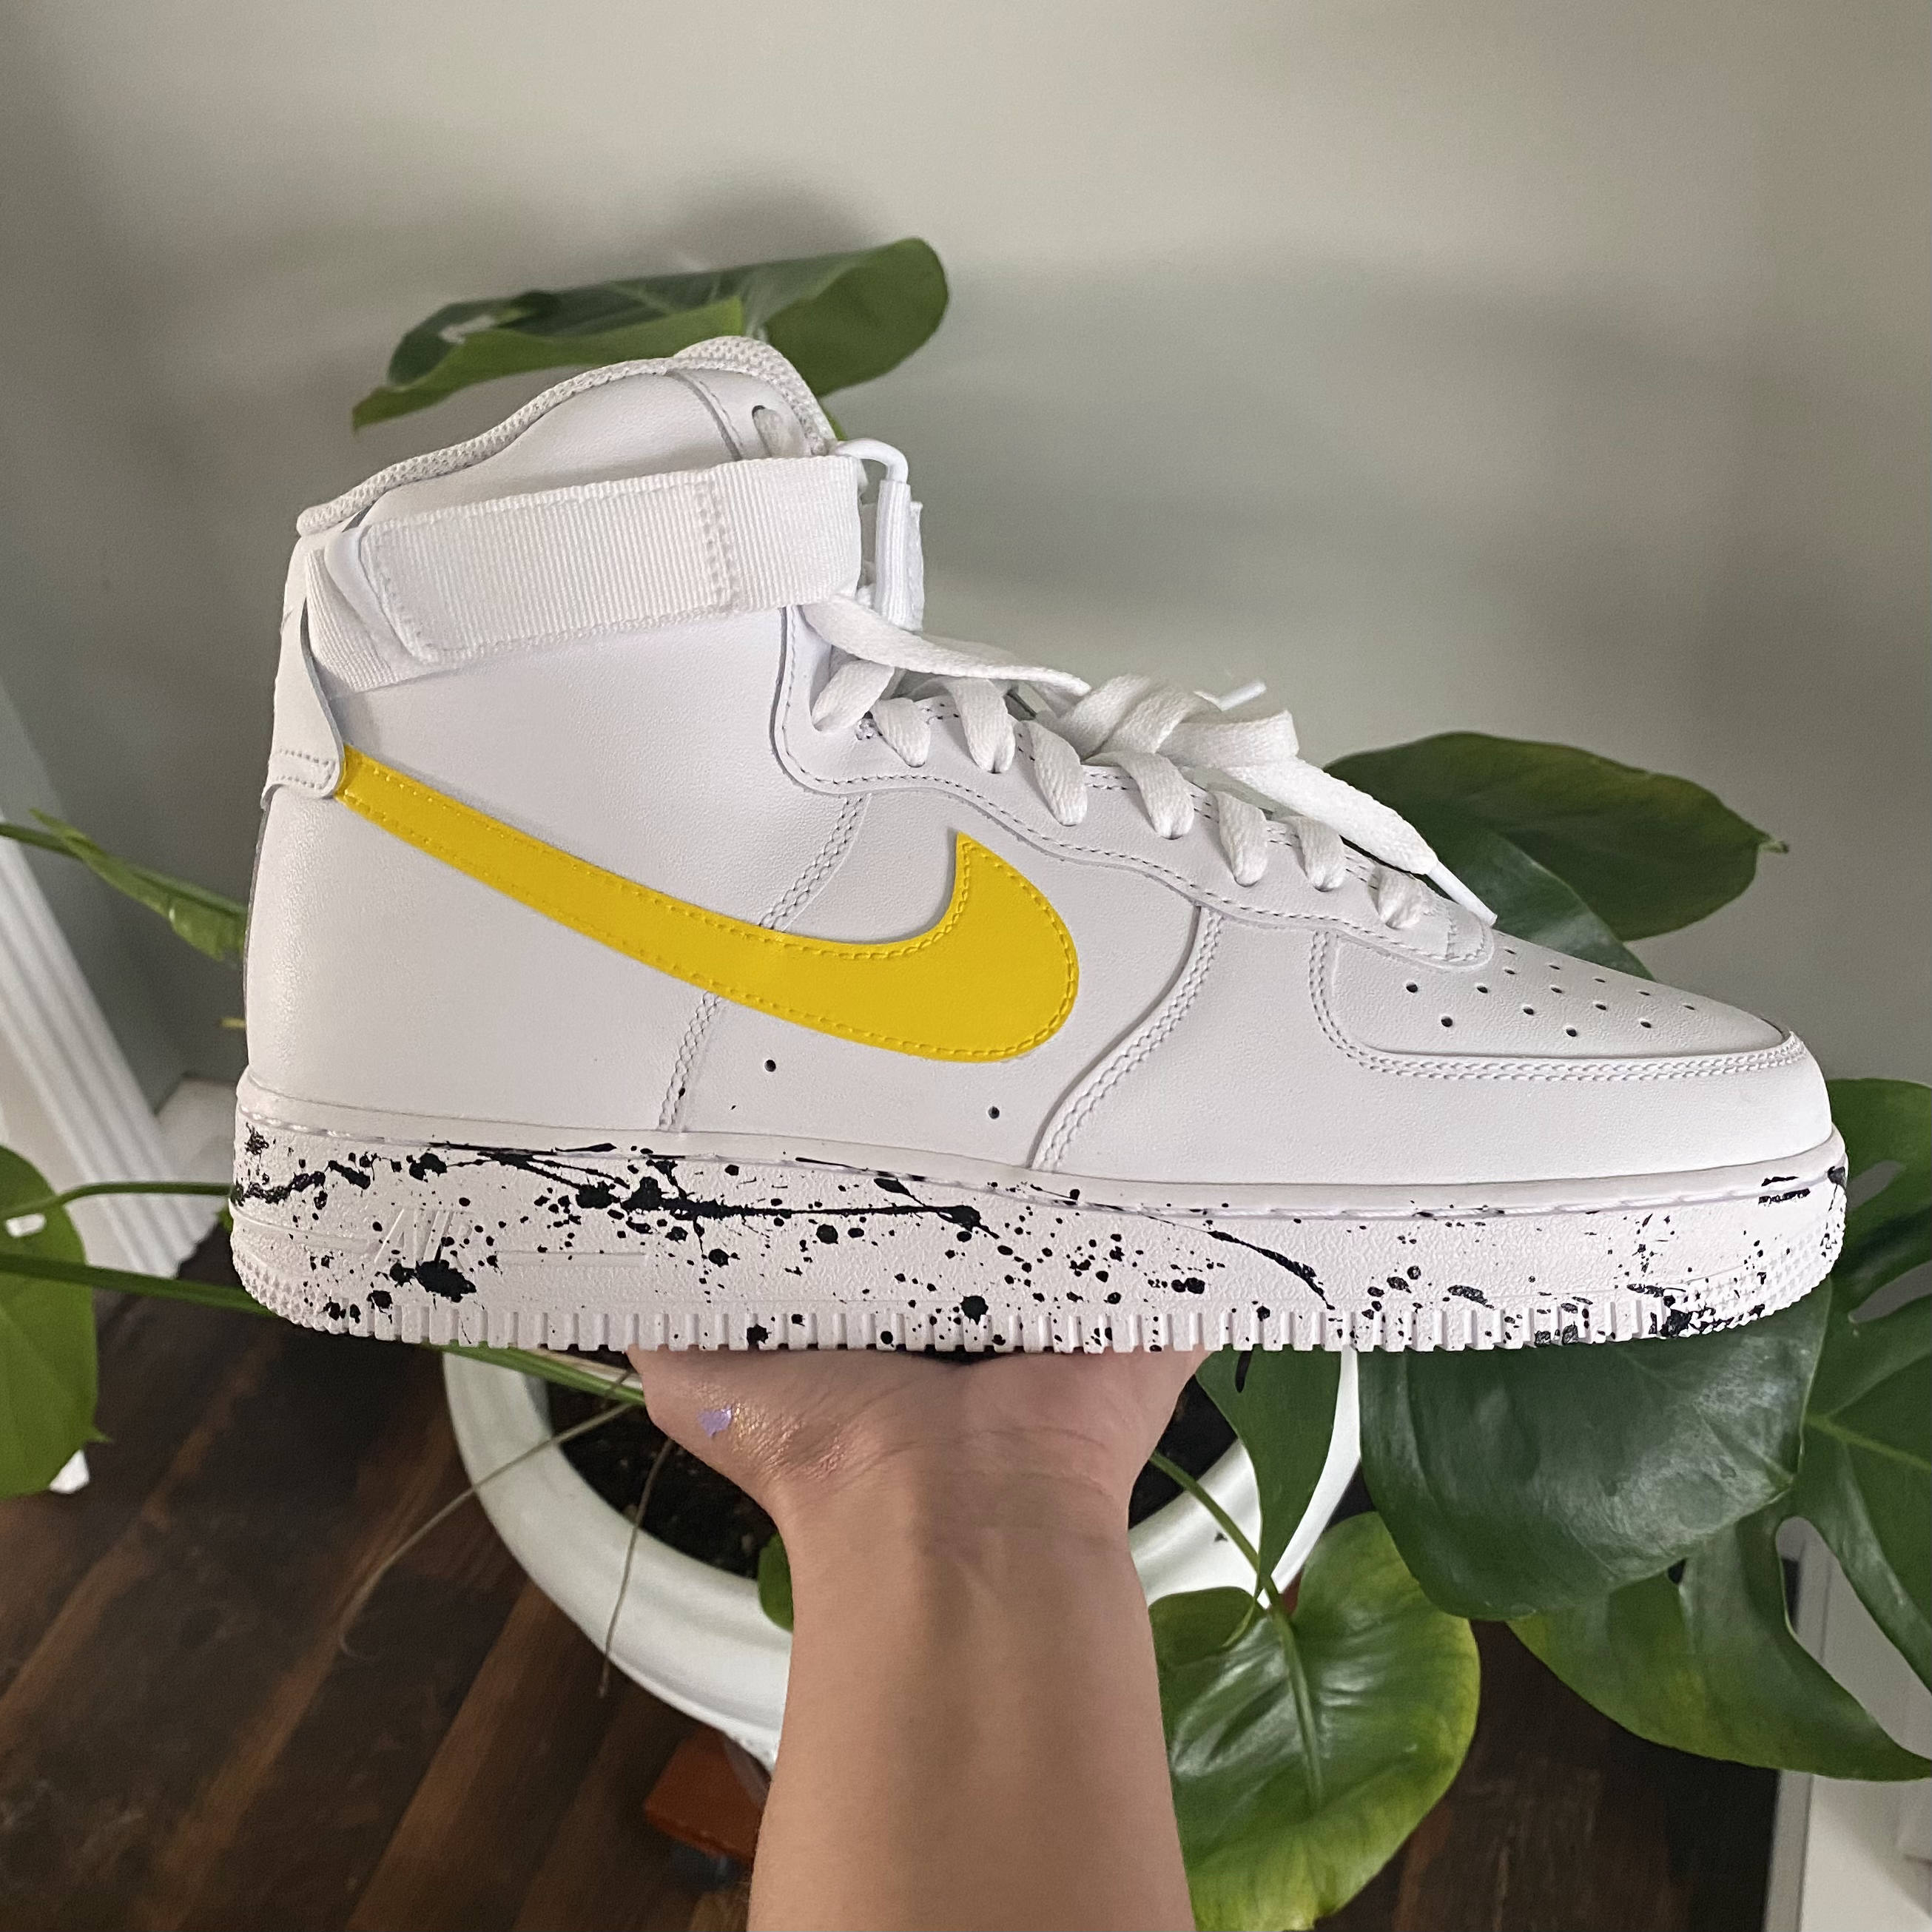 Air Force 1 Custom Low Cartoon Yellow Shoes White Black Outline Mens Womens Af1 Sneakers 12 Mens (13.5 Women's)